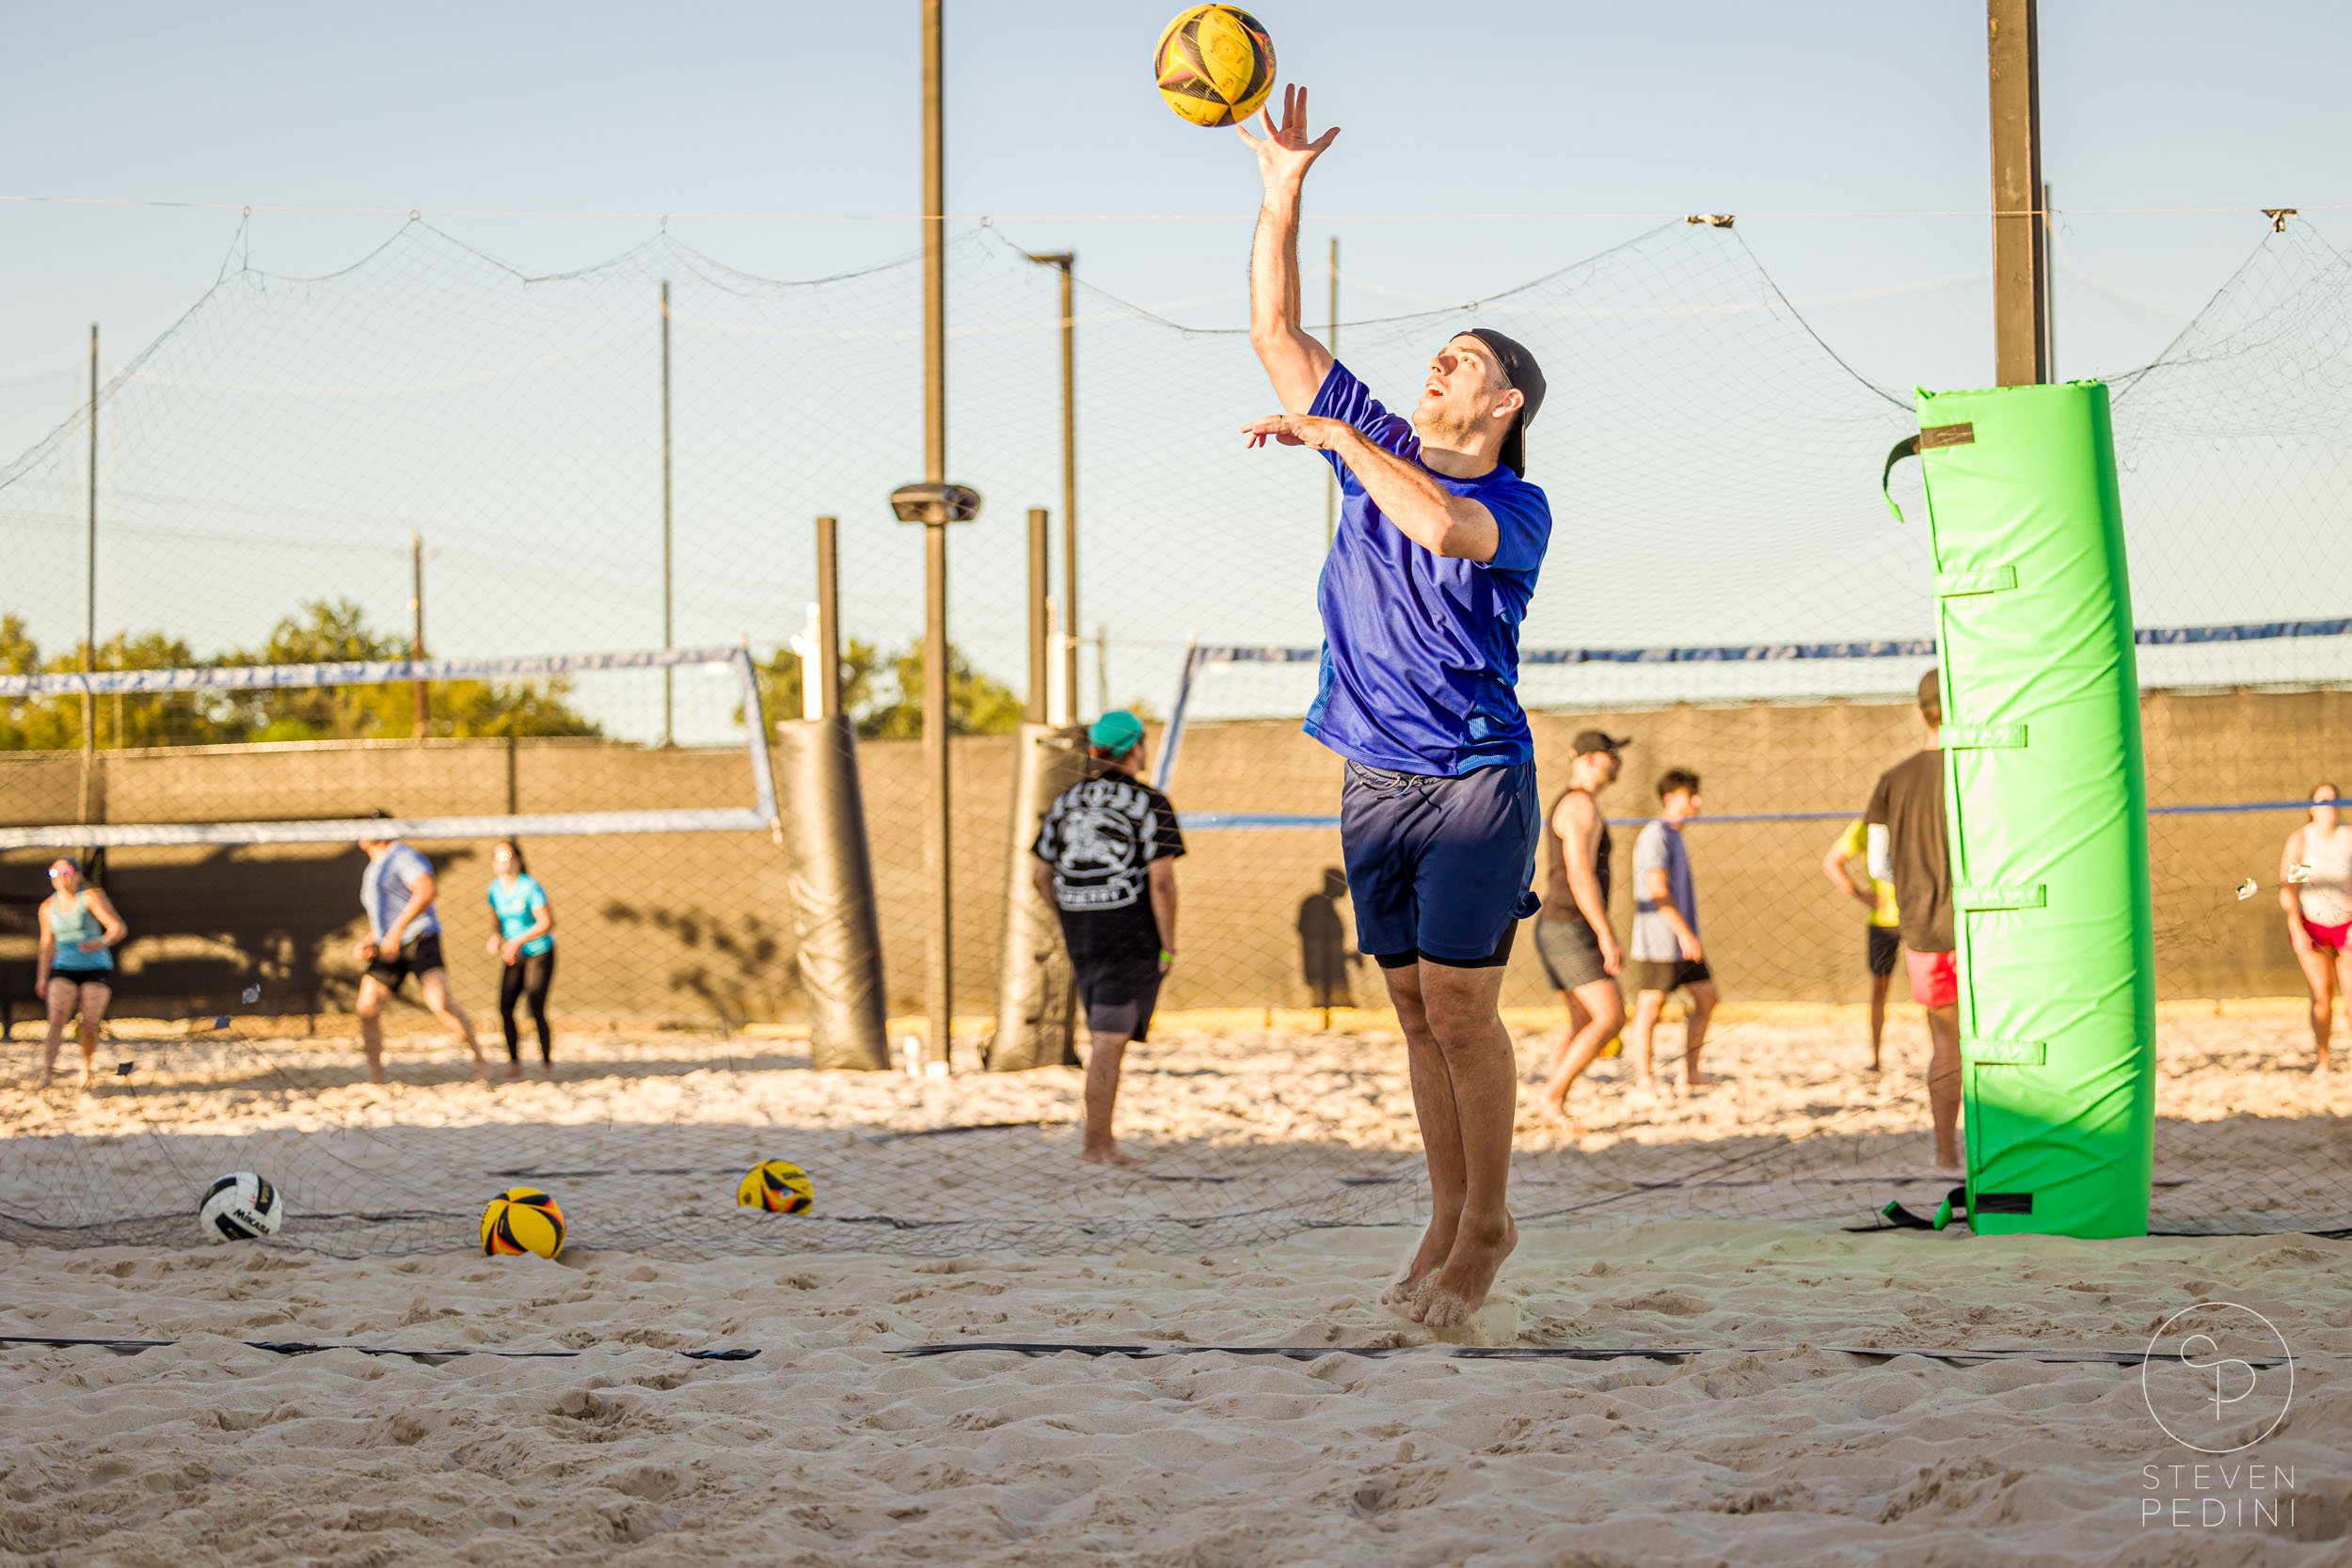 Steven Pedini Photography - Bumpy Pickle - Sand Volleyball - Houston TX - World Cup of Volleyball - 00140.jpg